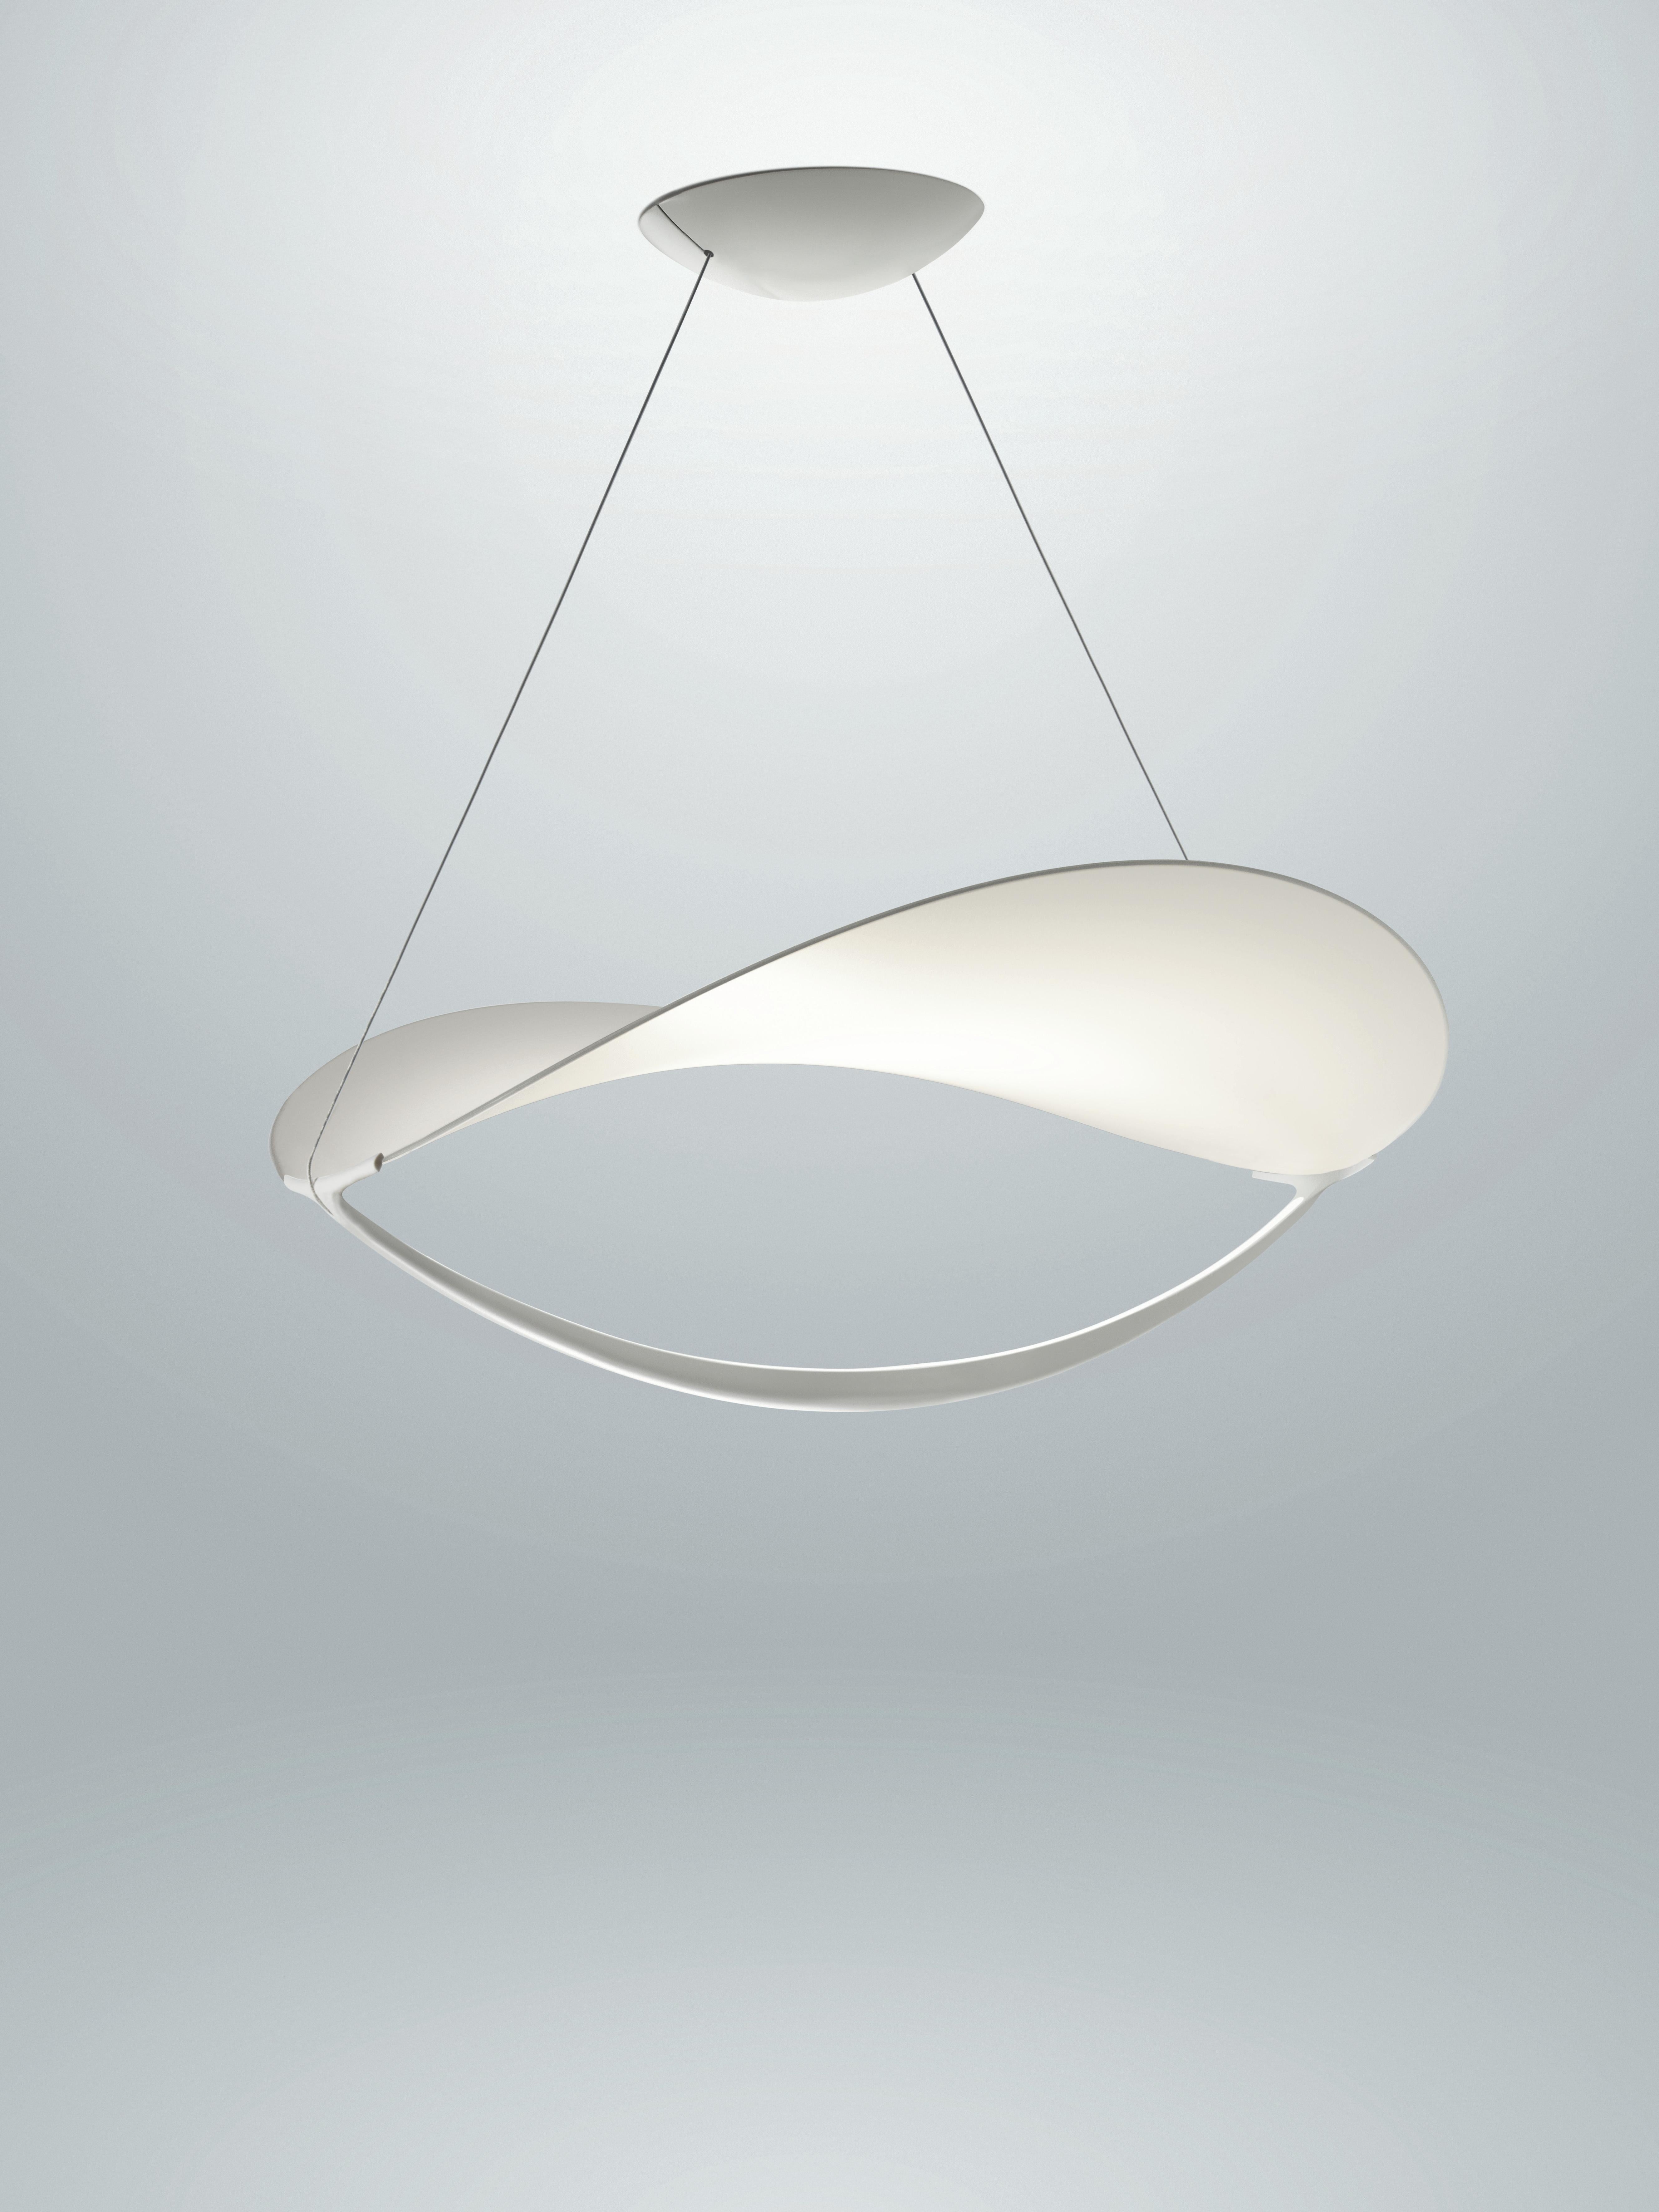 Large in size but light and dynamic, Plena provides dual lighting: reflected on the surface below it, and spreading towards the ceiling. An intriguing light, of special charm, to completely permeate a room while remaining soft and enveloping. Placed